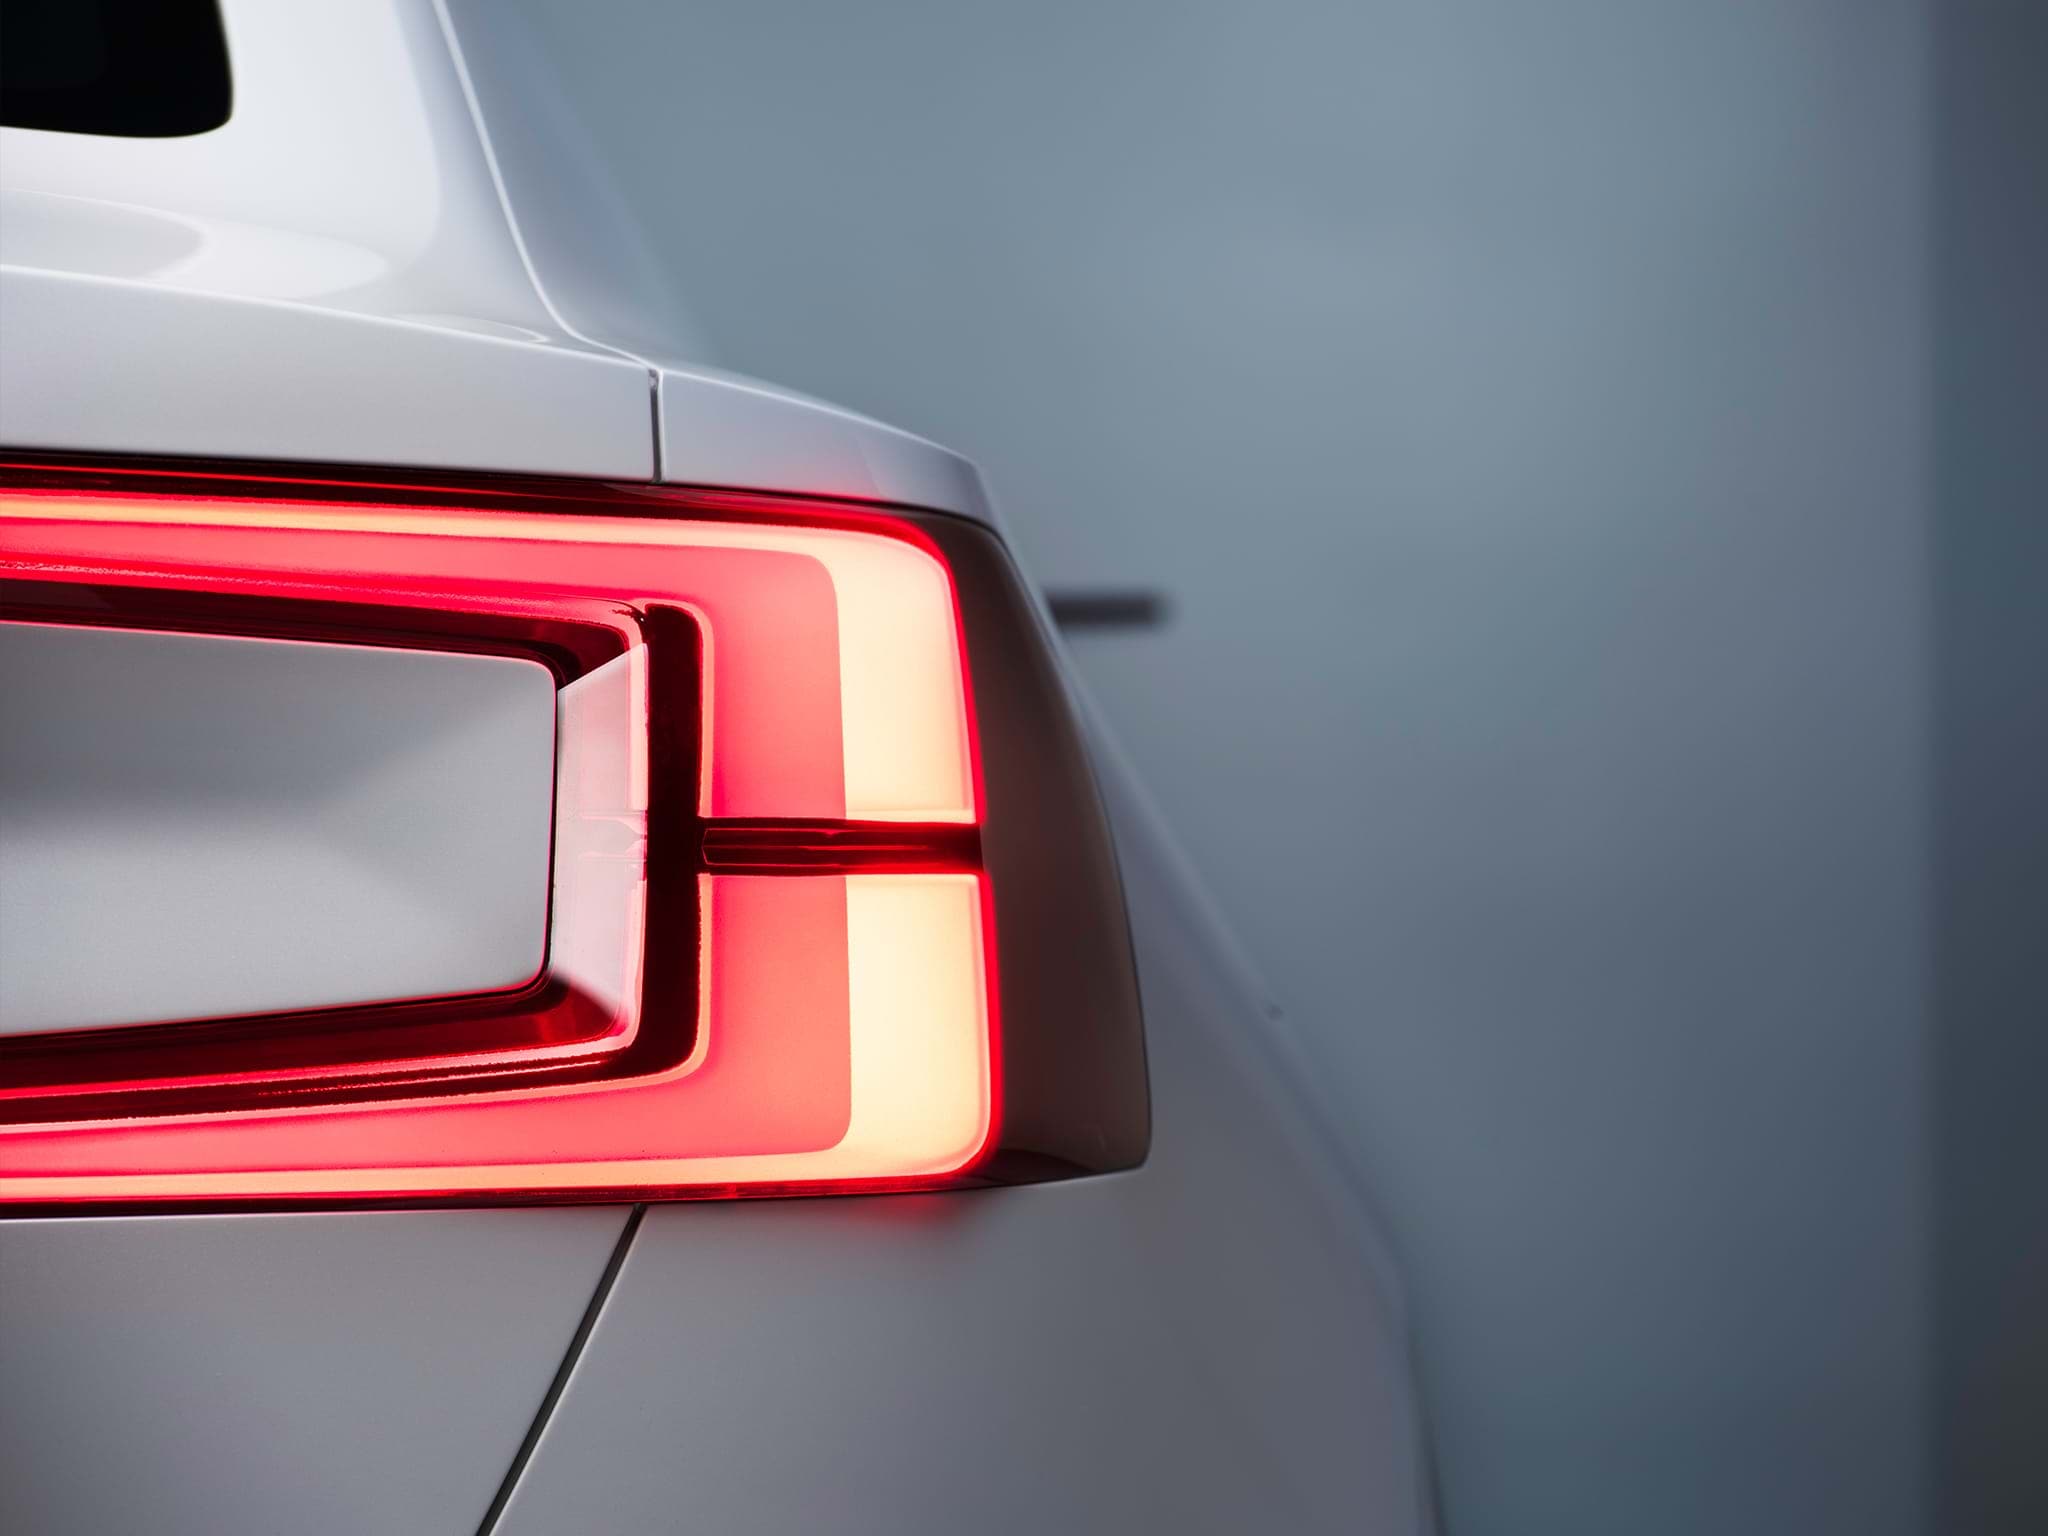 Partial view of rear of white Volvo Concept 40 sedan car with lit rear lights